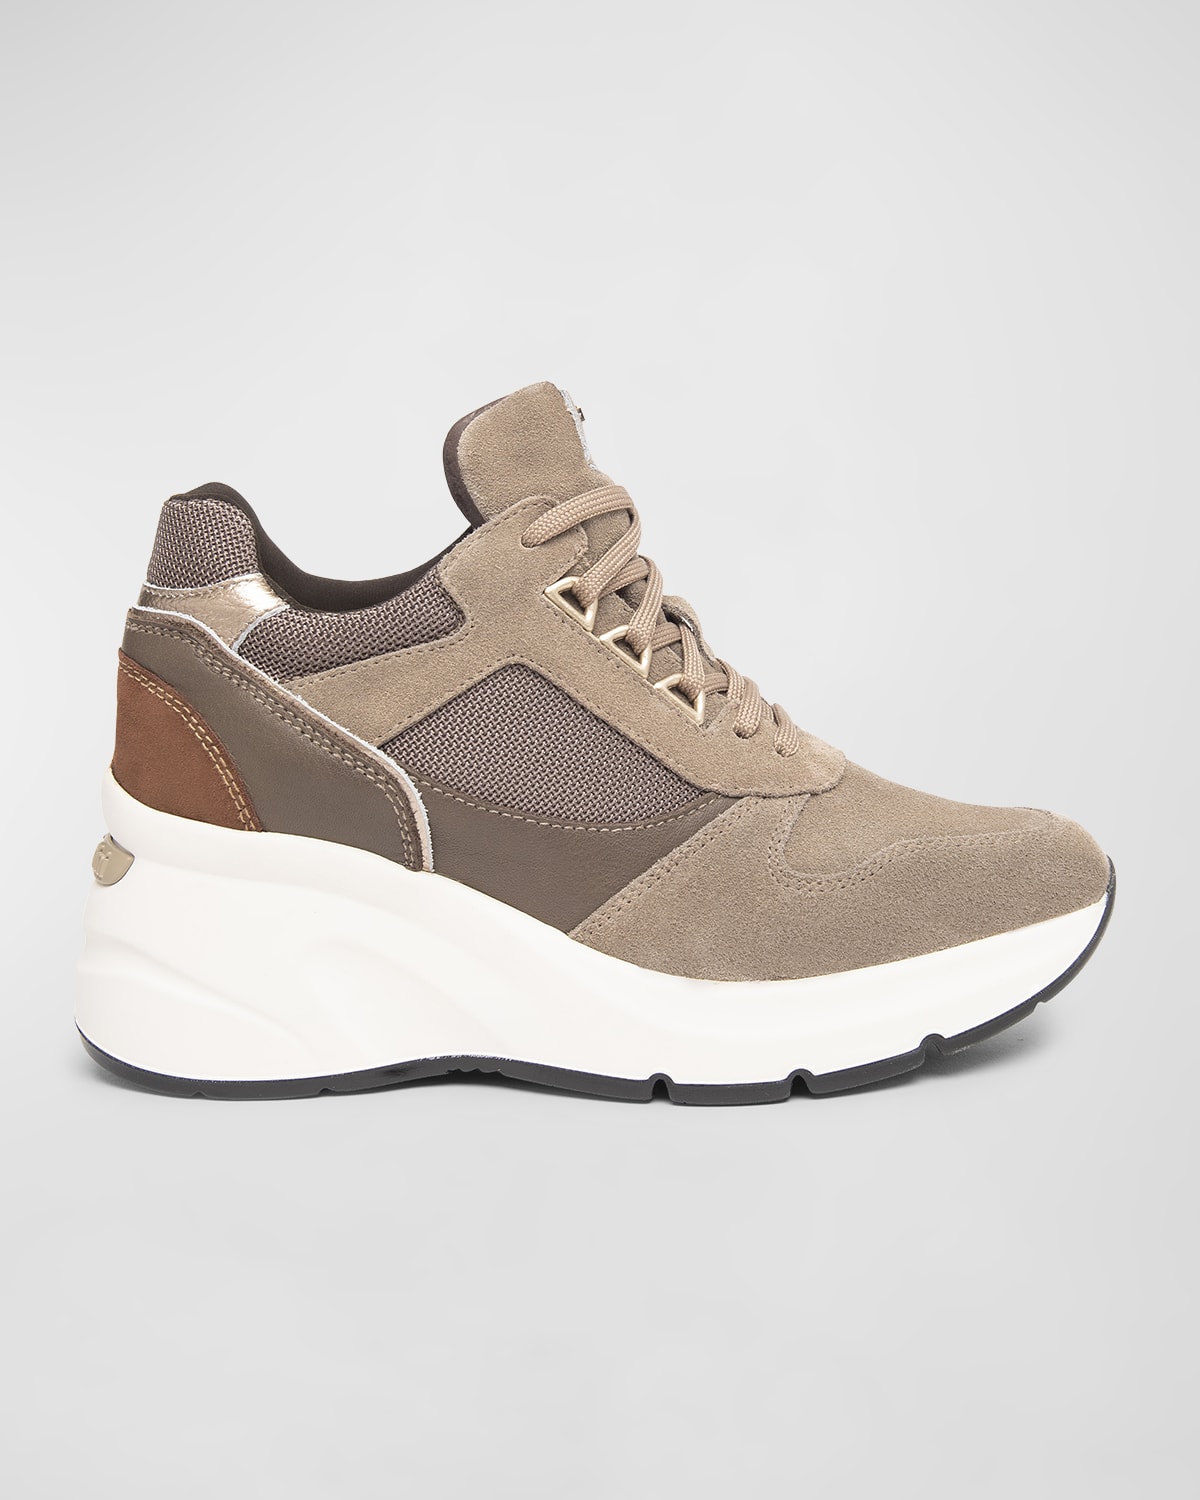 Mixed Leather Wedge Runner Sneakers